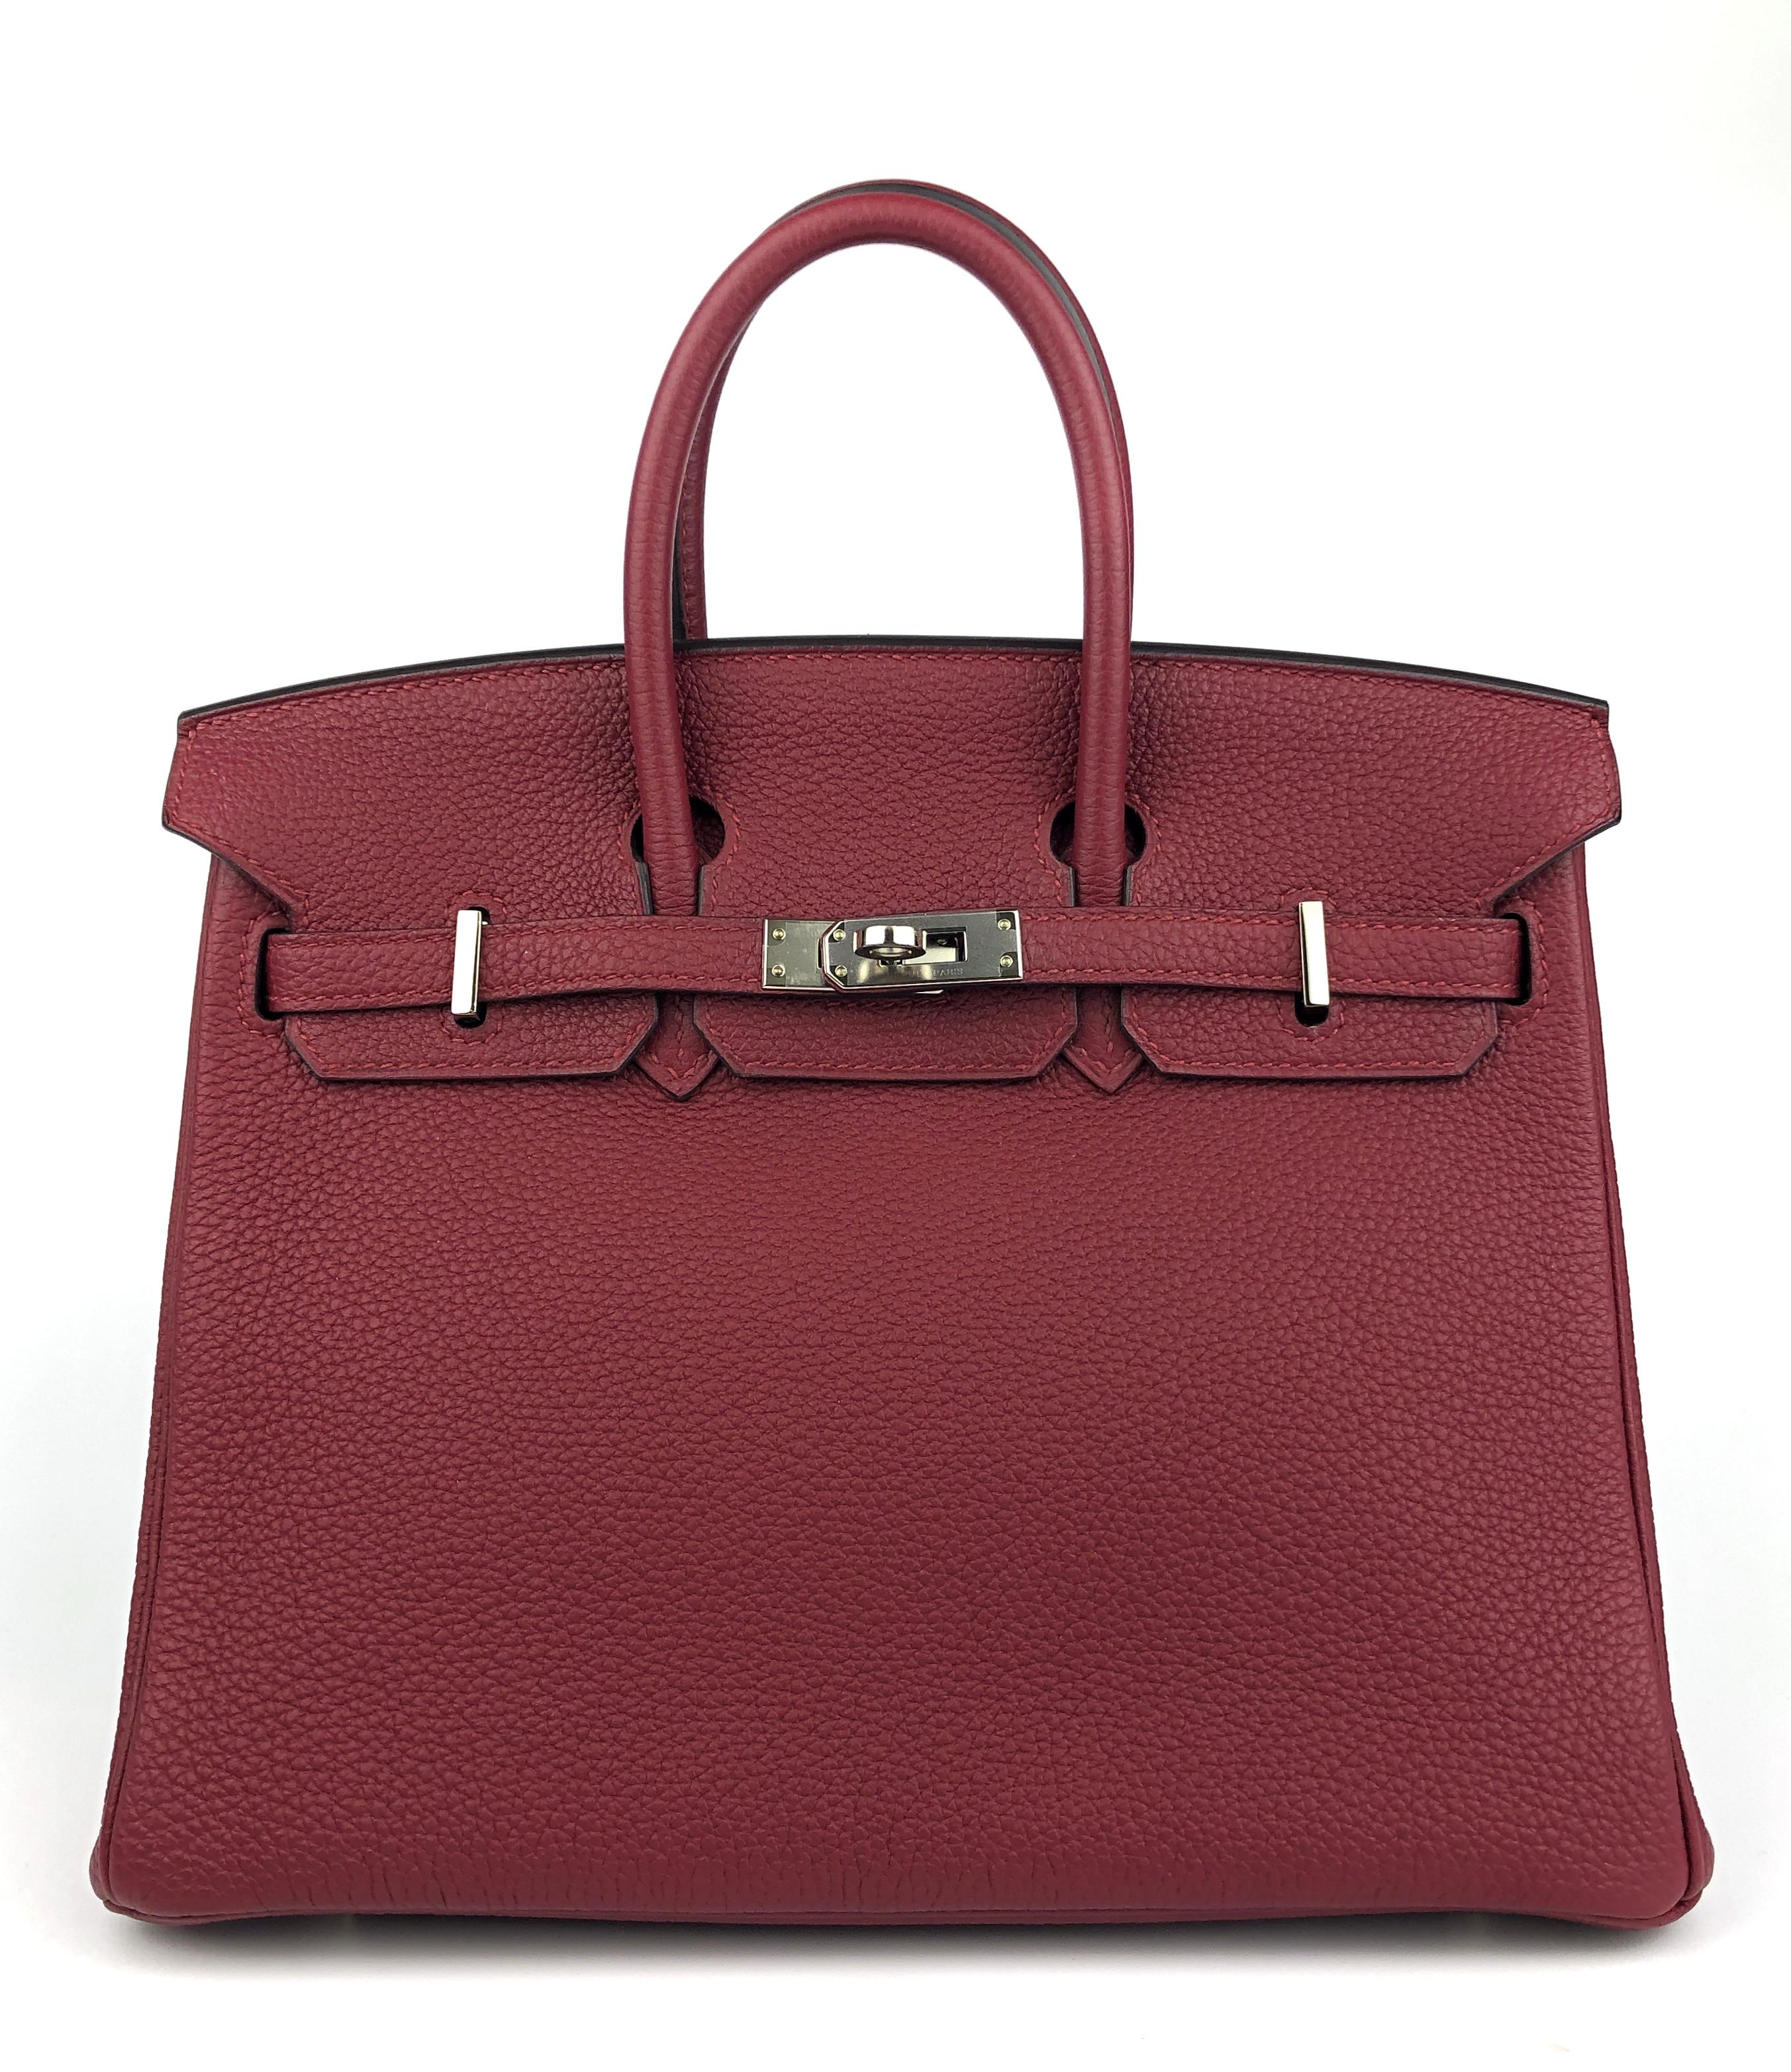 Rare Pristine Hermes Birkin 25 Rouge Grenat Red Togo Leather Palladium Hardware. Pristine Condition with Plastic on Hardware. 2016 X Stamp.

Shop with Confidence from Lux Addicts. Authenticity Guaranteed! 